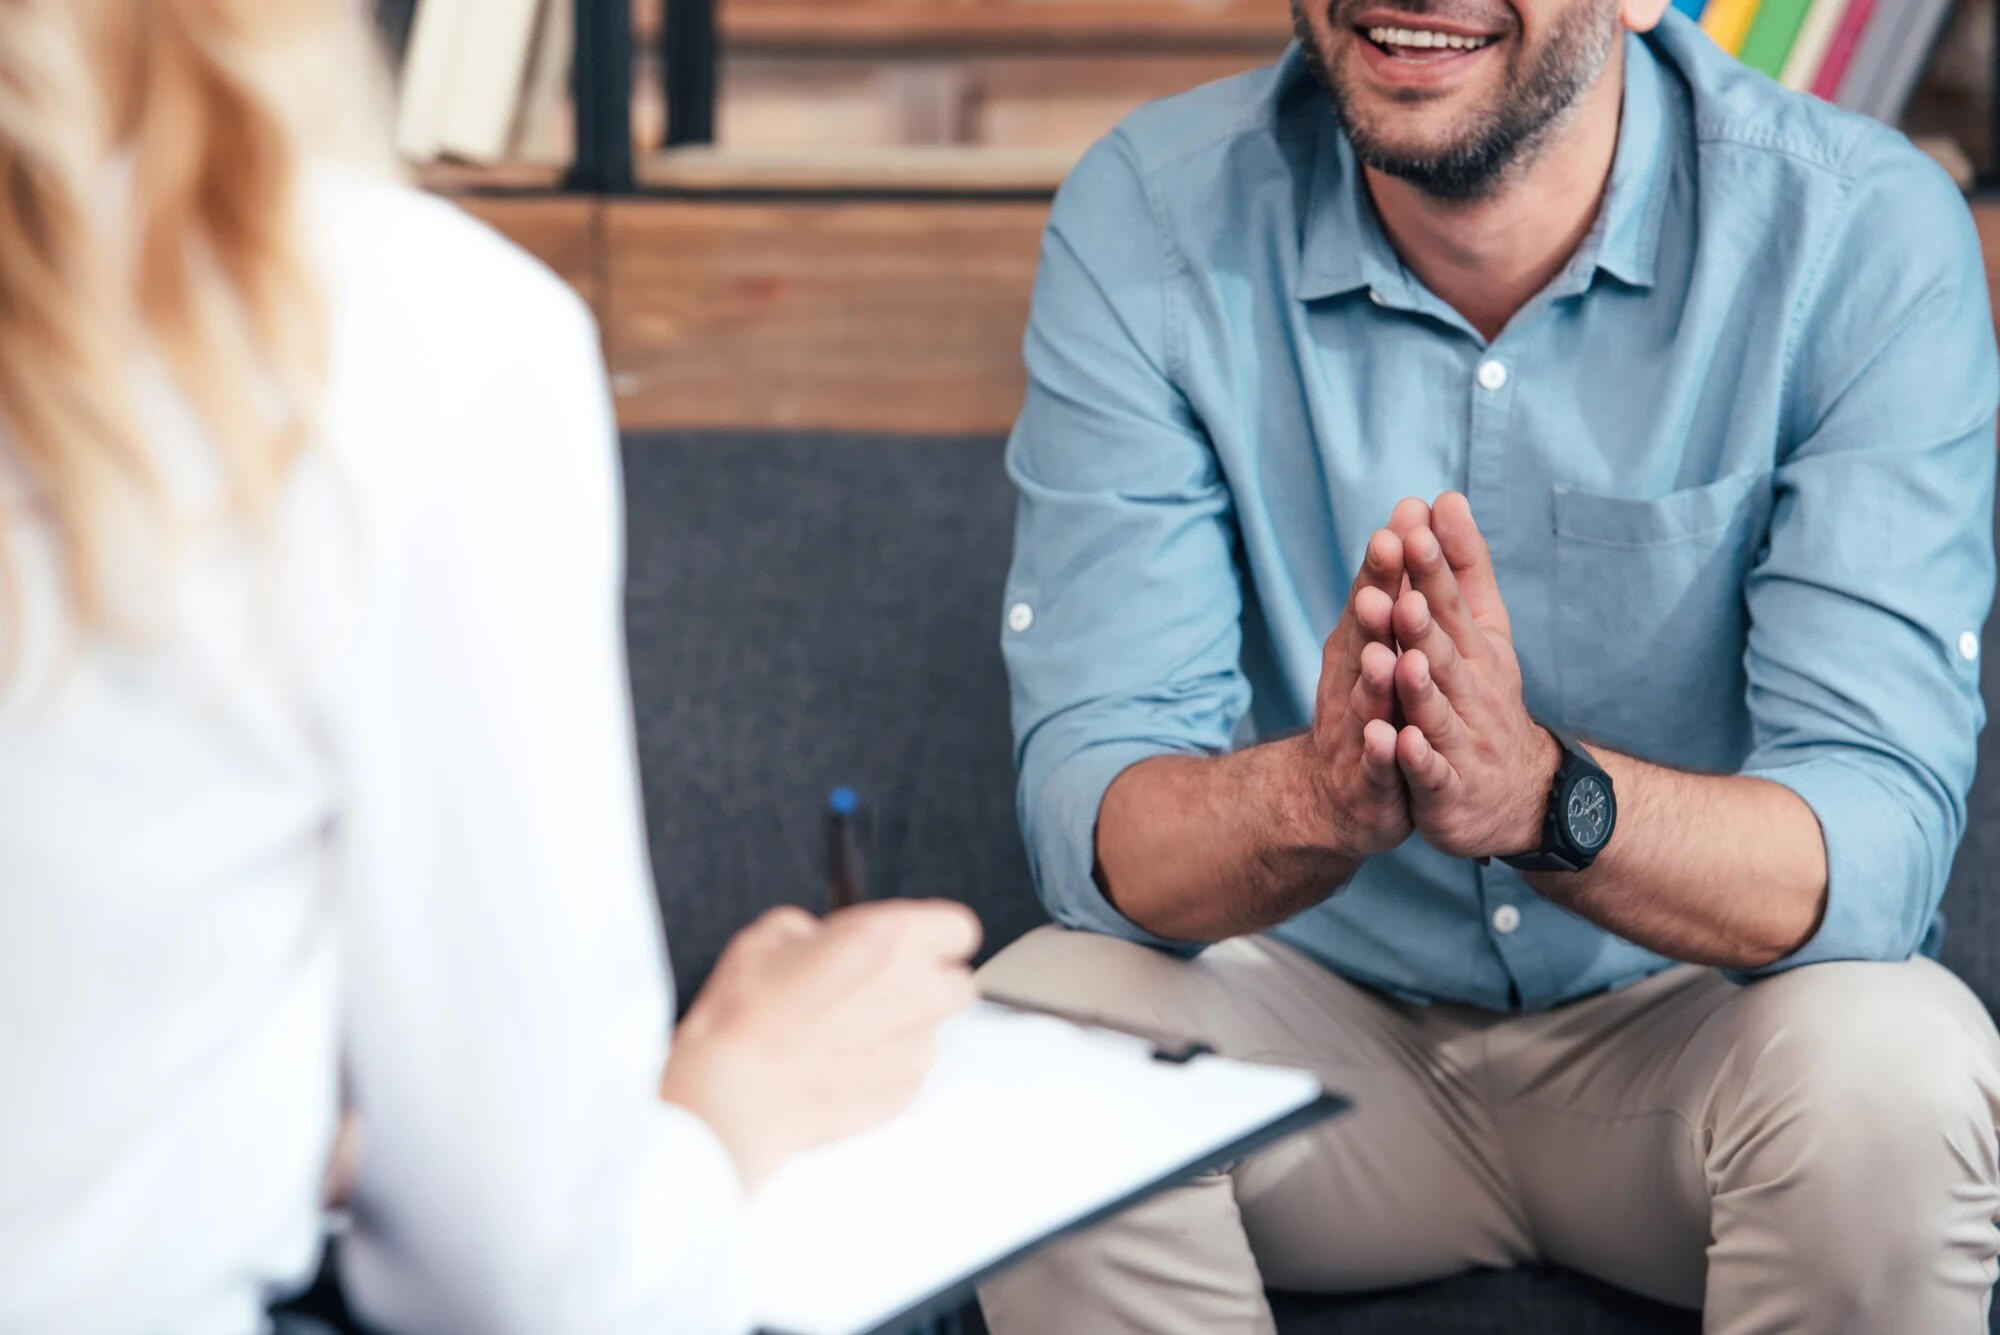 Mental Health Counselor Job: How to Hire the Right Talent